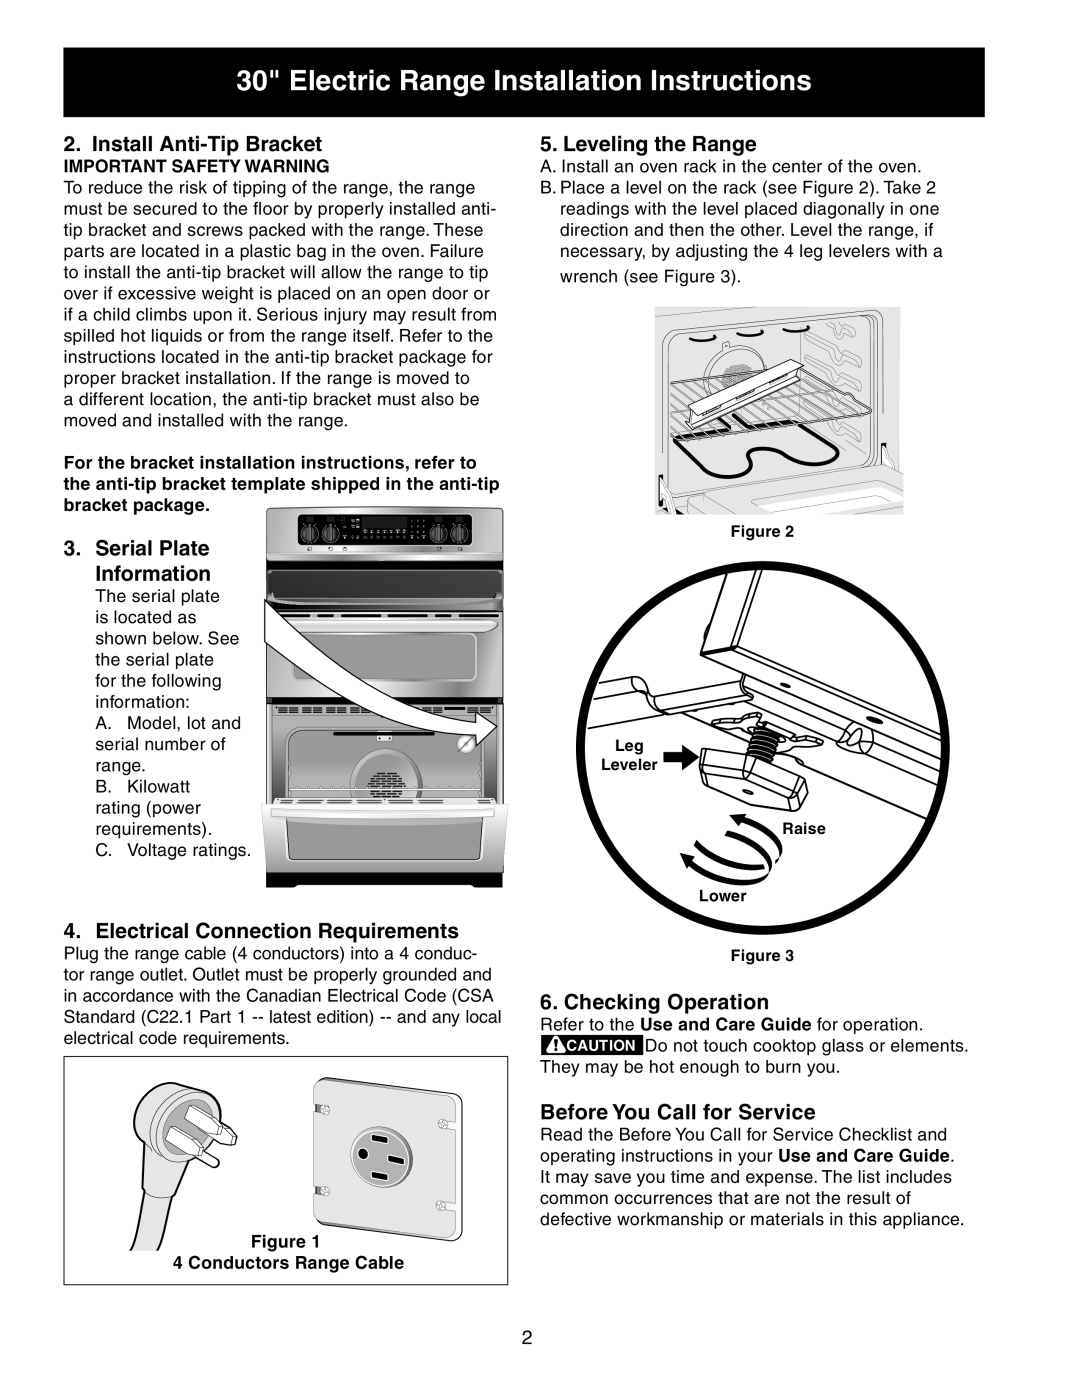 Frigidaire 318201725 Install Anti-TipBracket, Serial Plate Information, Electrical Connection Requirements 